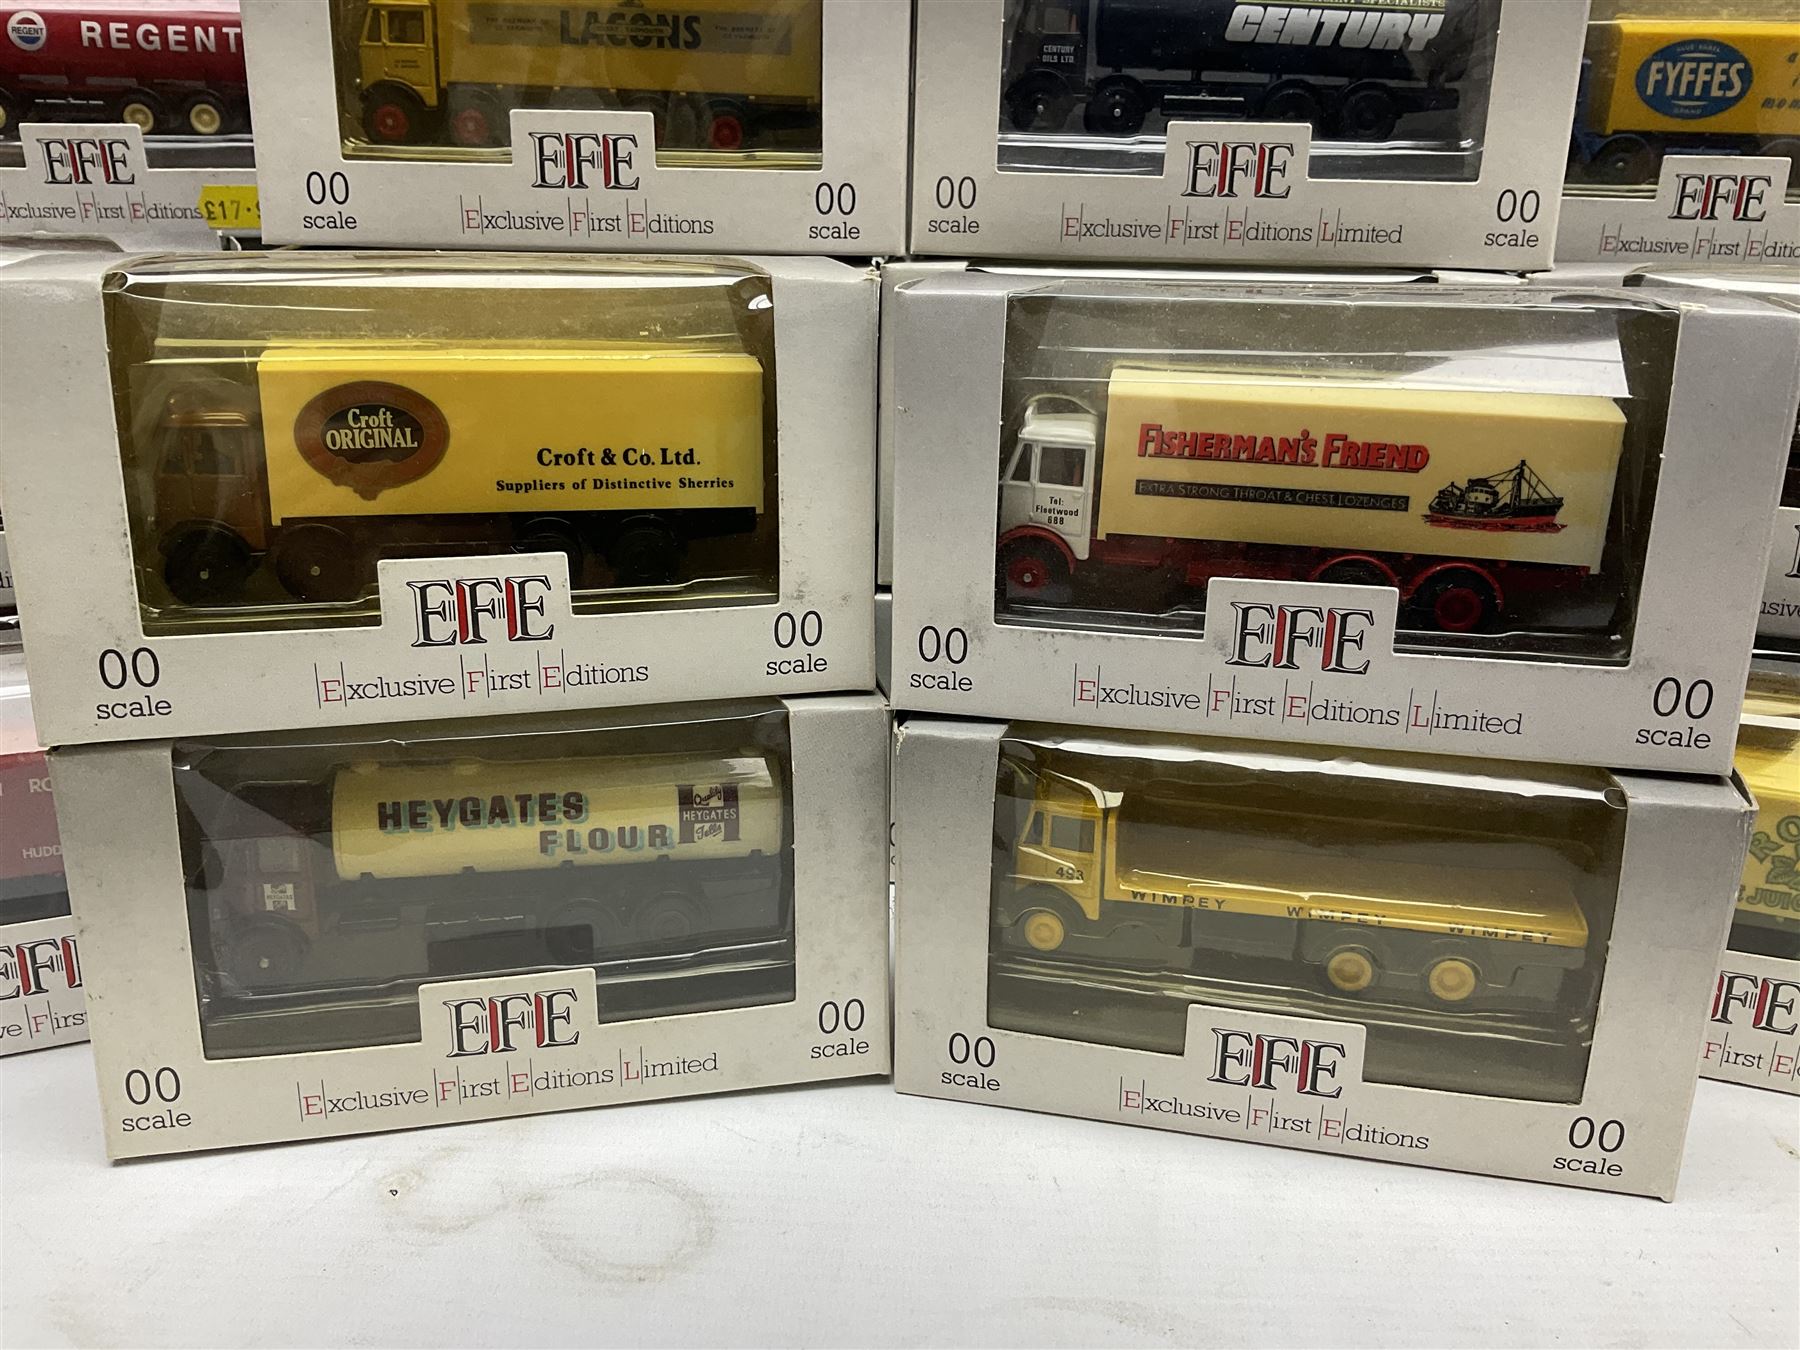 Thirty-two Exclusive First Editions Commercials '00' scale die-cast models - Image 4 of 11